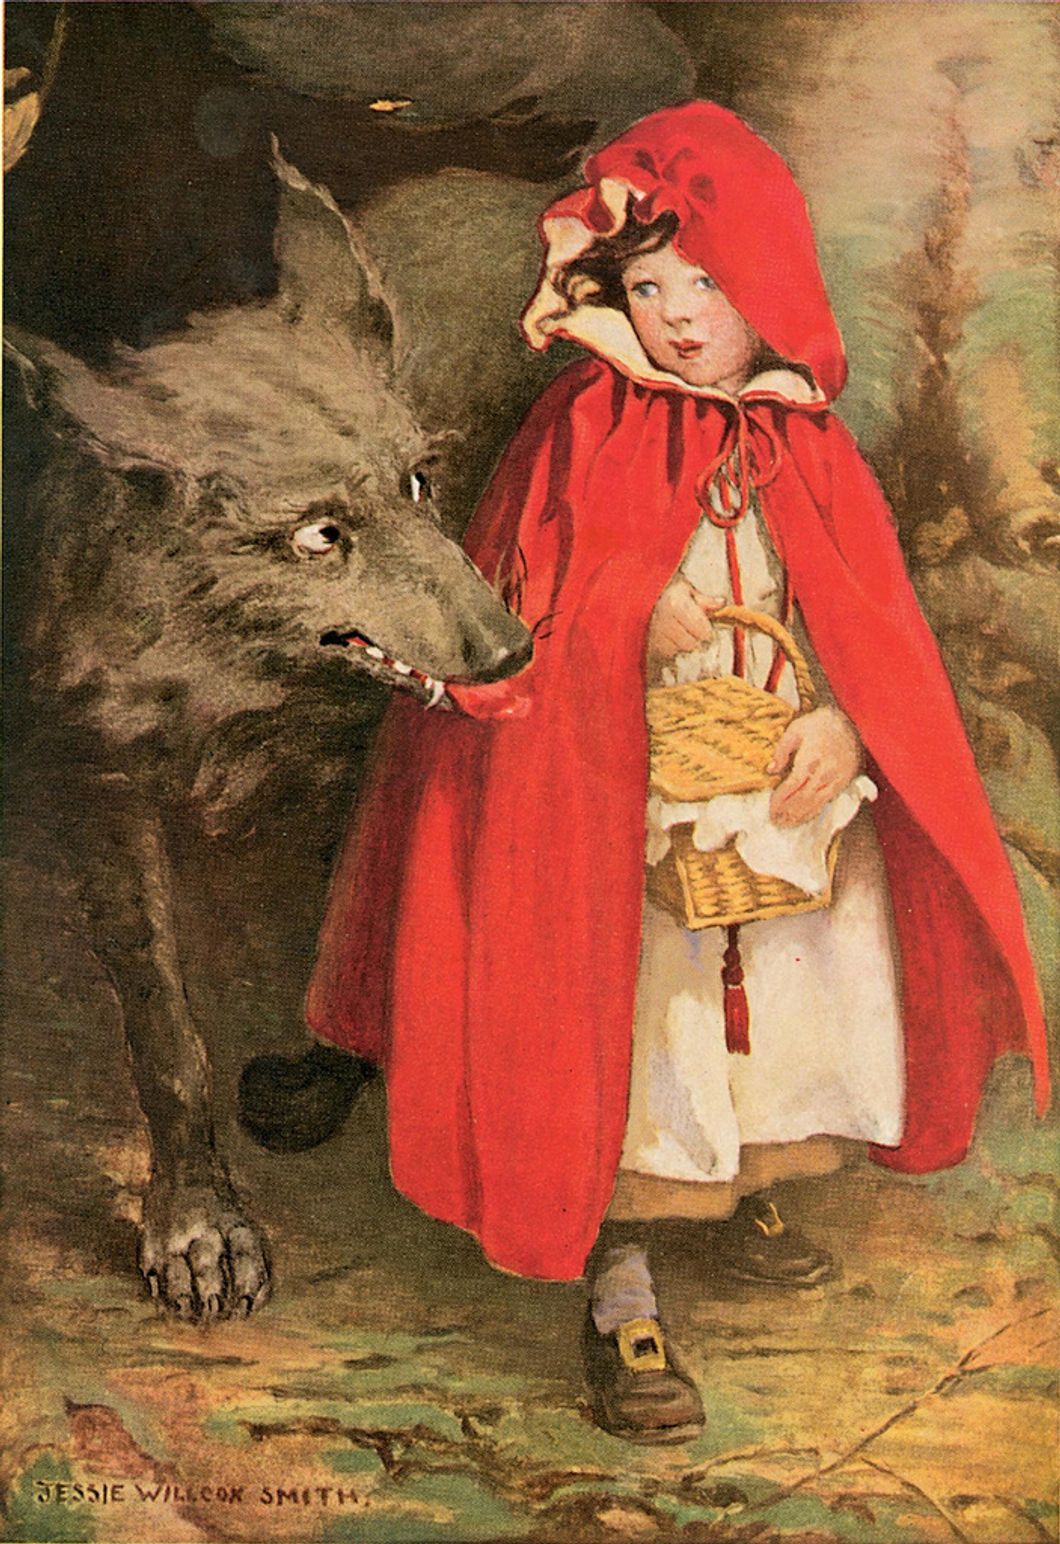 Fiction On Odyssey: The Perspective Of The Wolf From 'Little Red Riding Hood'